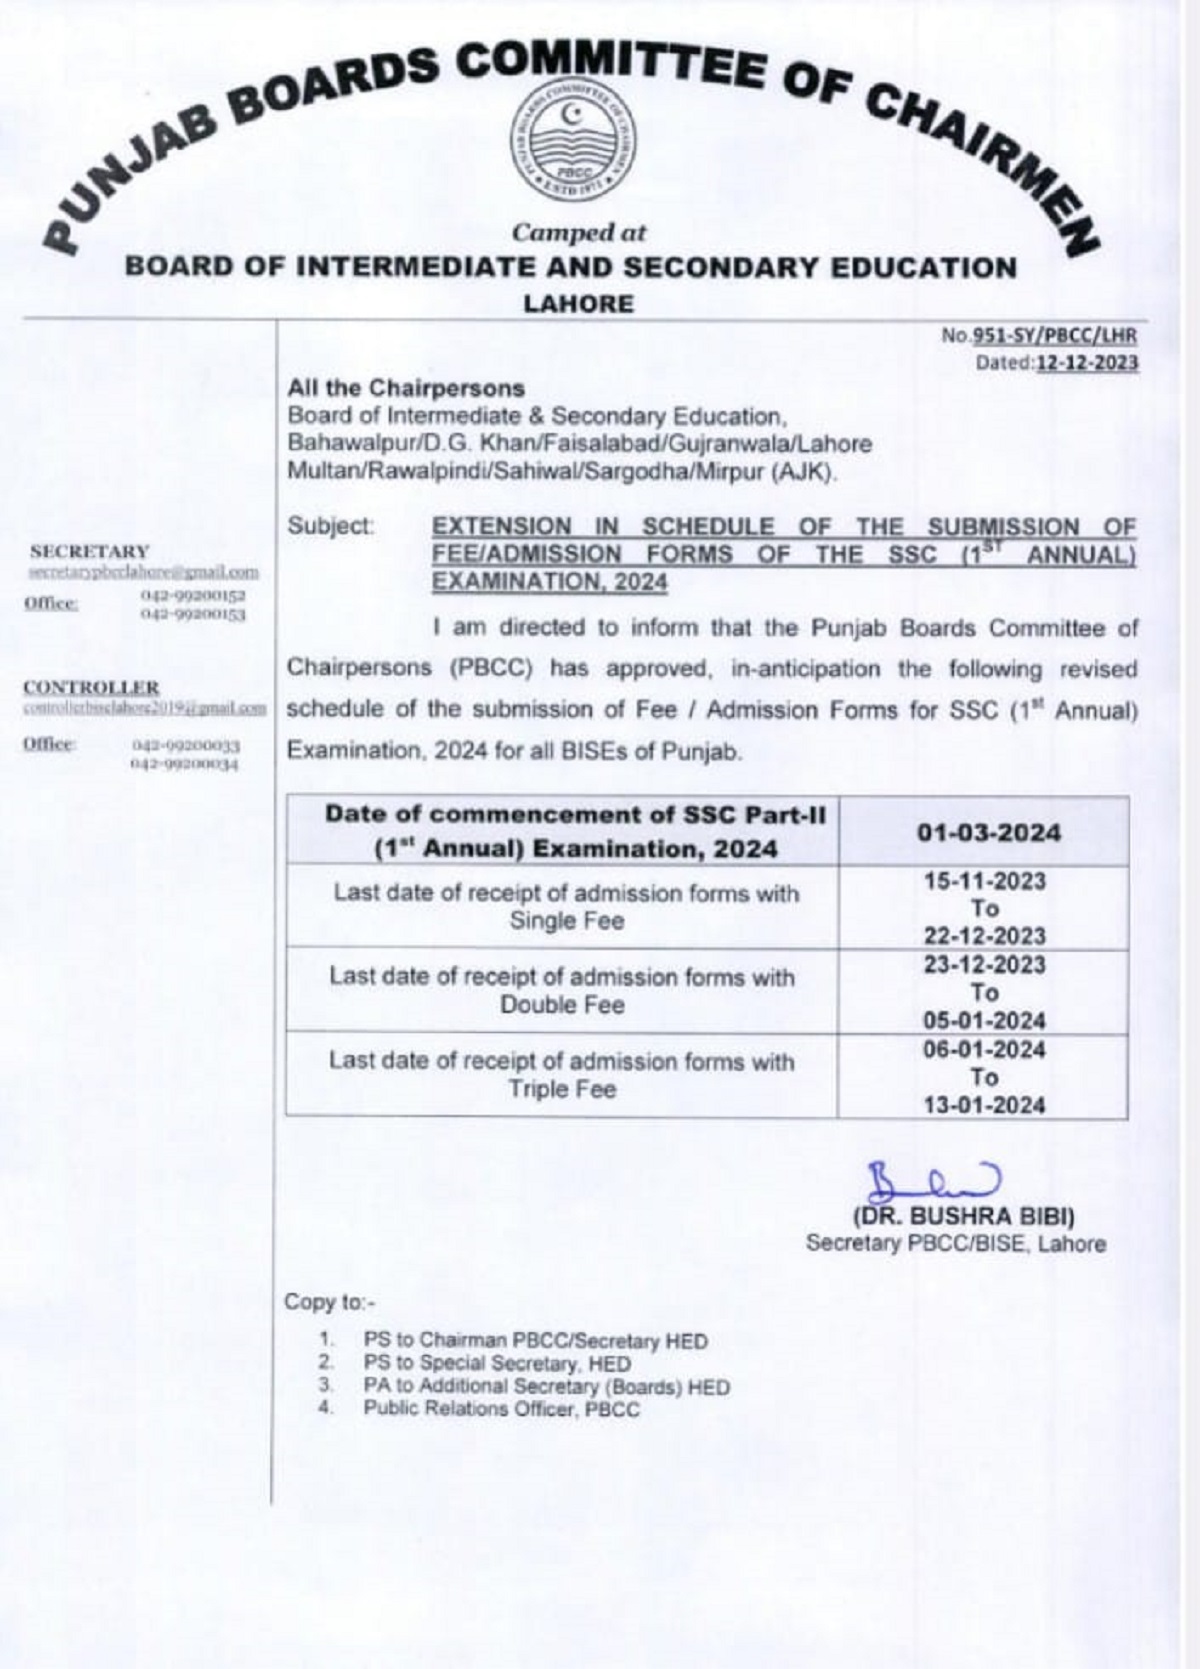 Extension in Schedule of the Submission of Admission Forms of Matric SSC Annual 2024